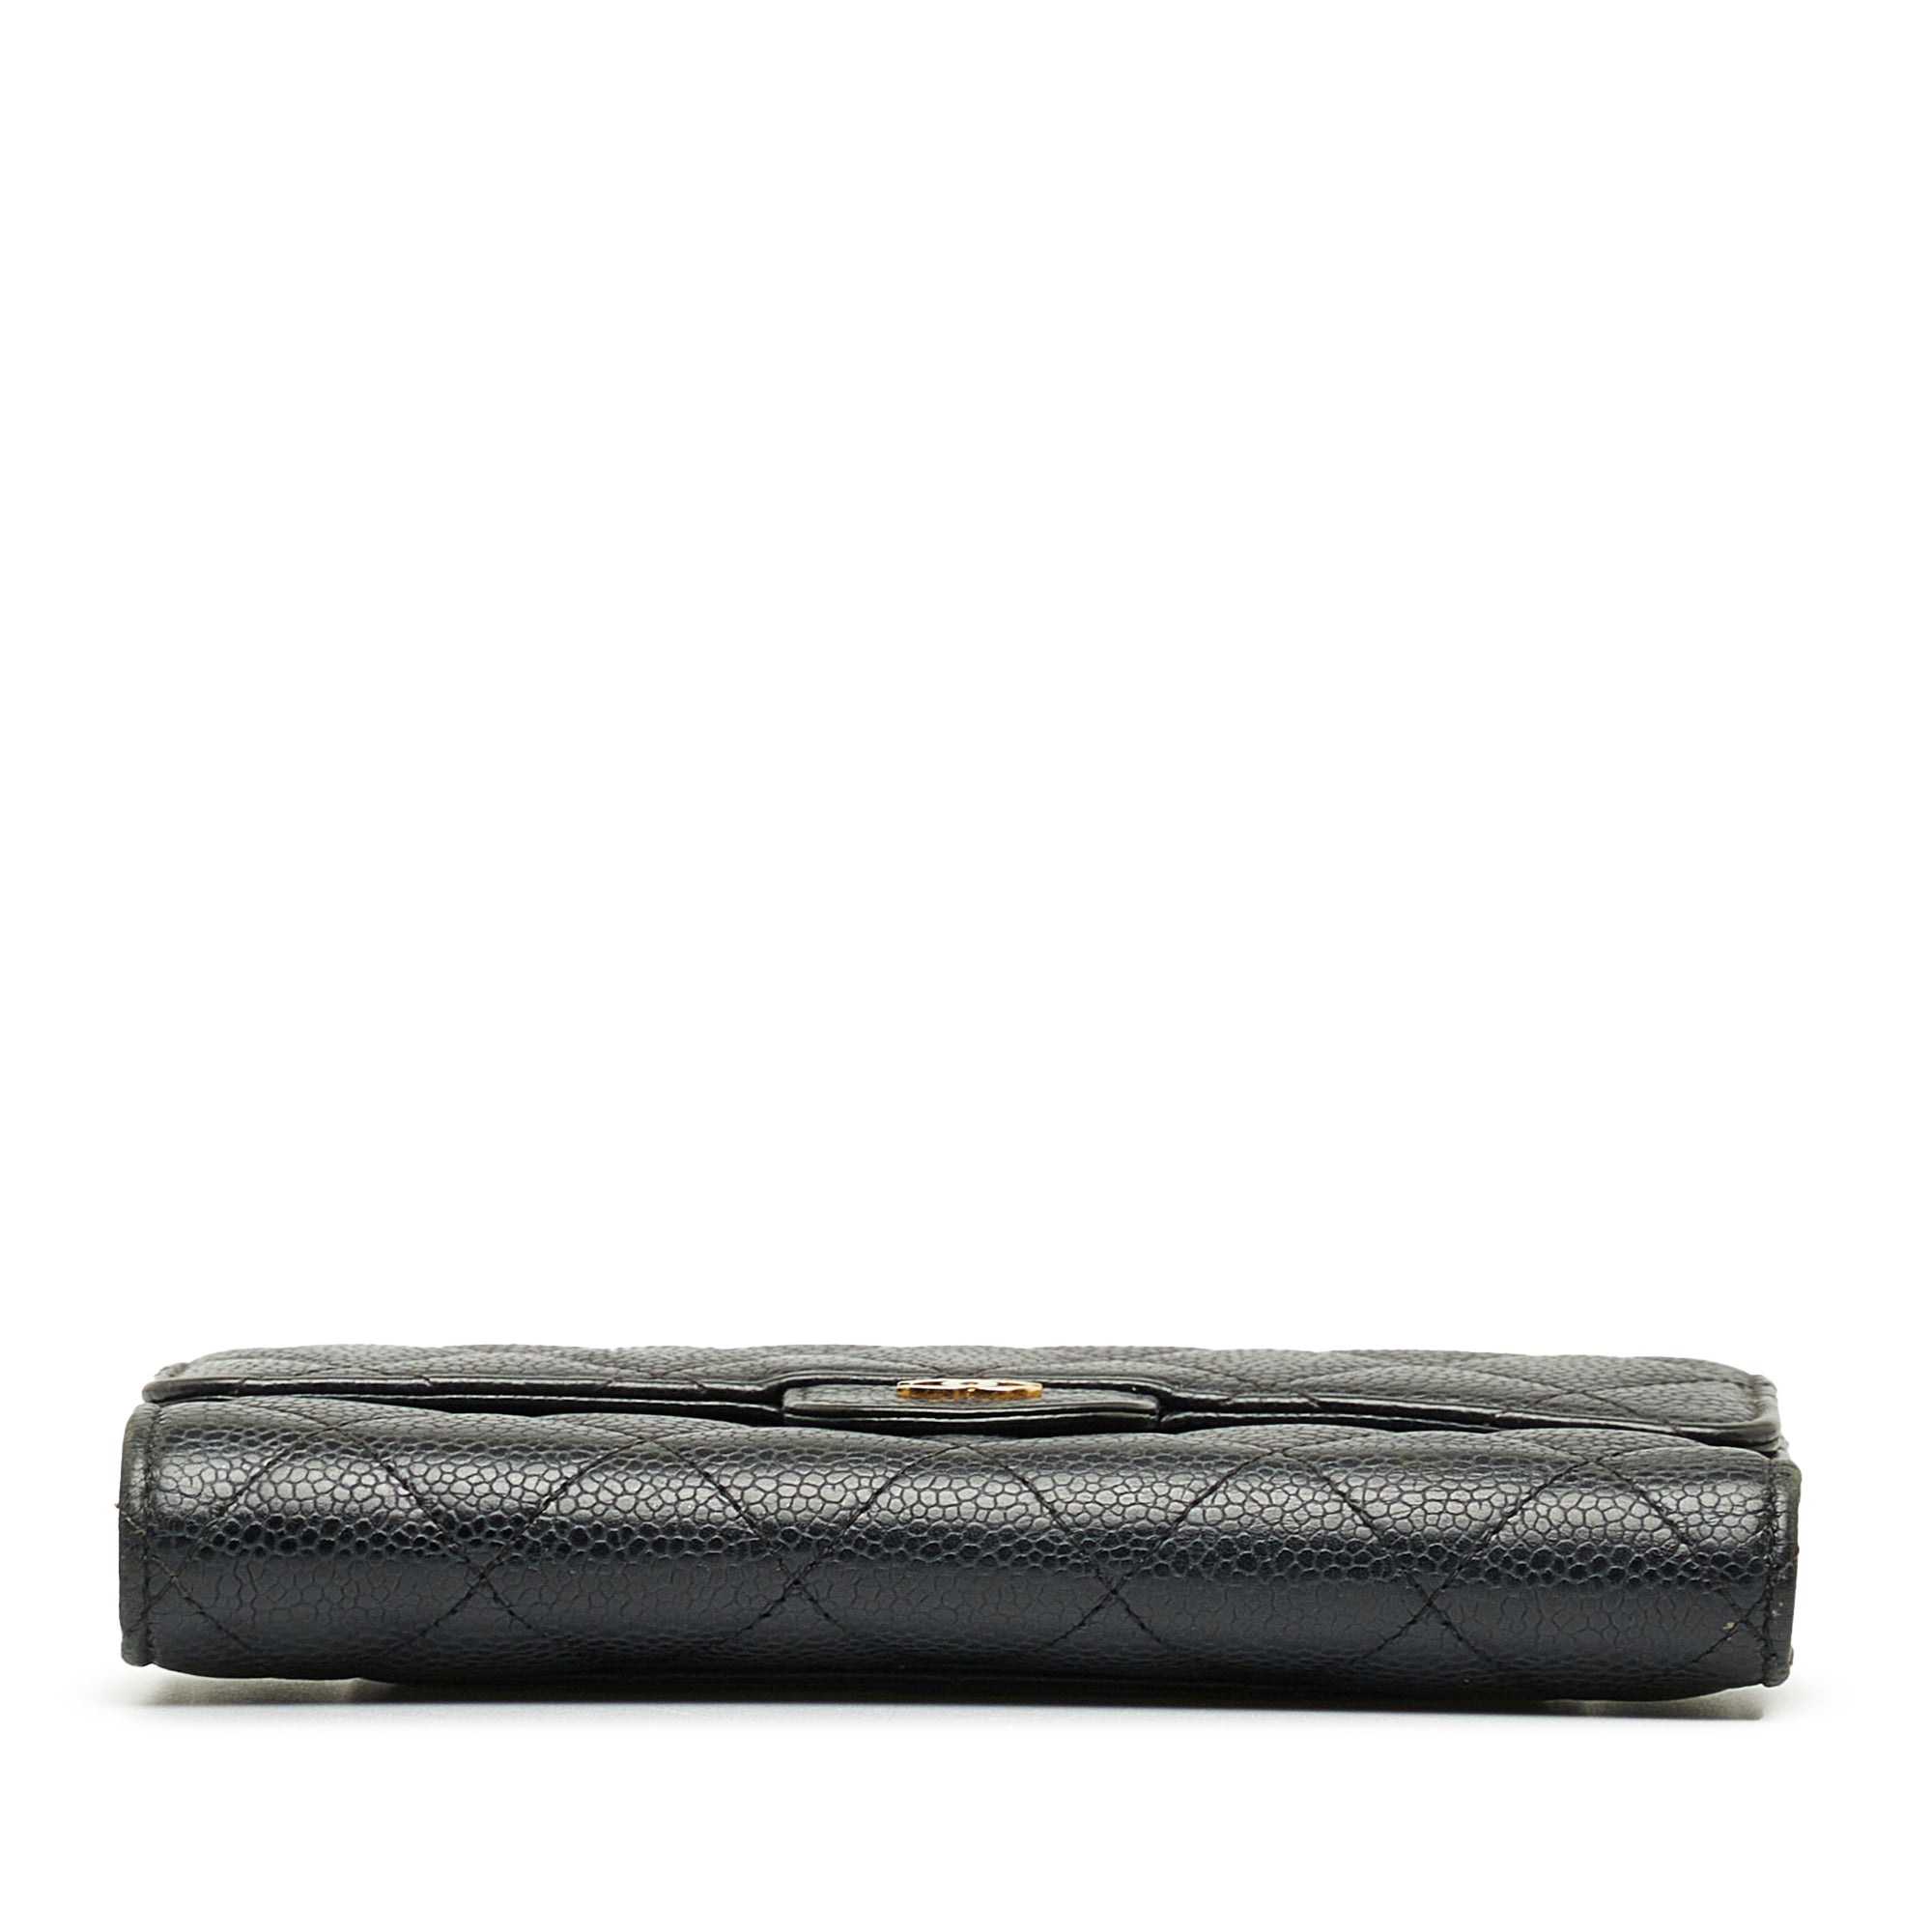 Chanel Quilted Ghw Cc Long Wallet Caviar Skin Leather Black Auction